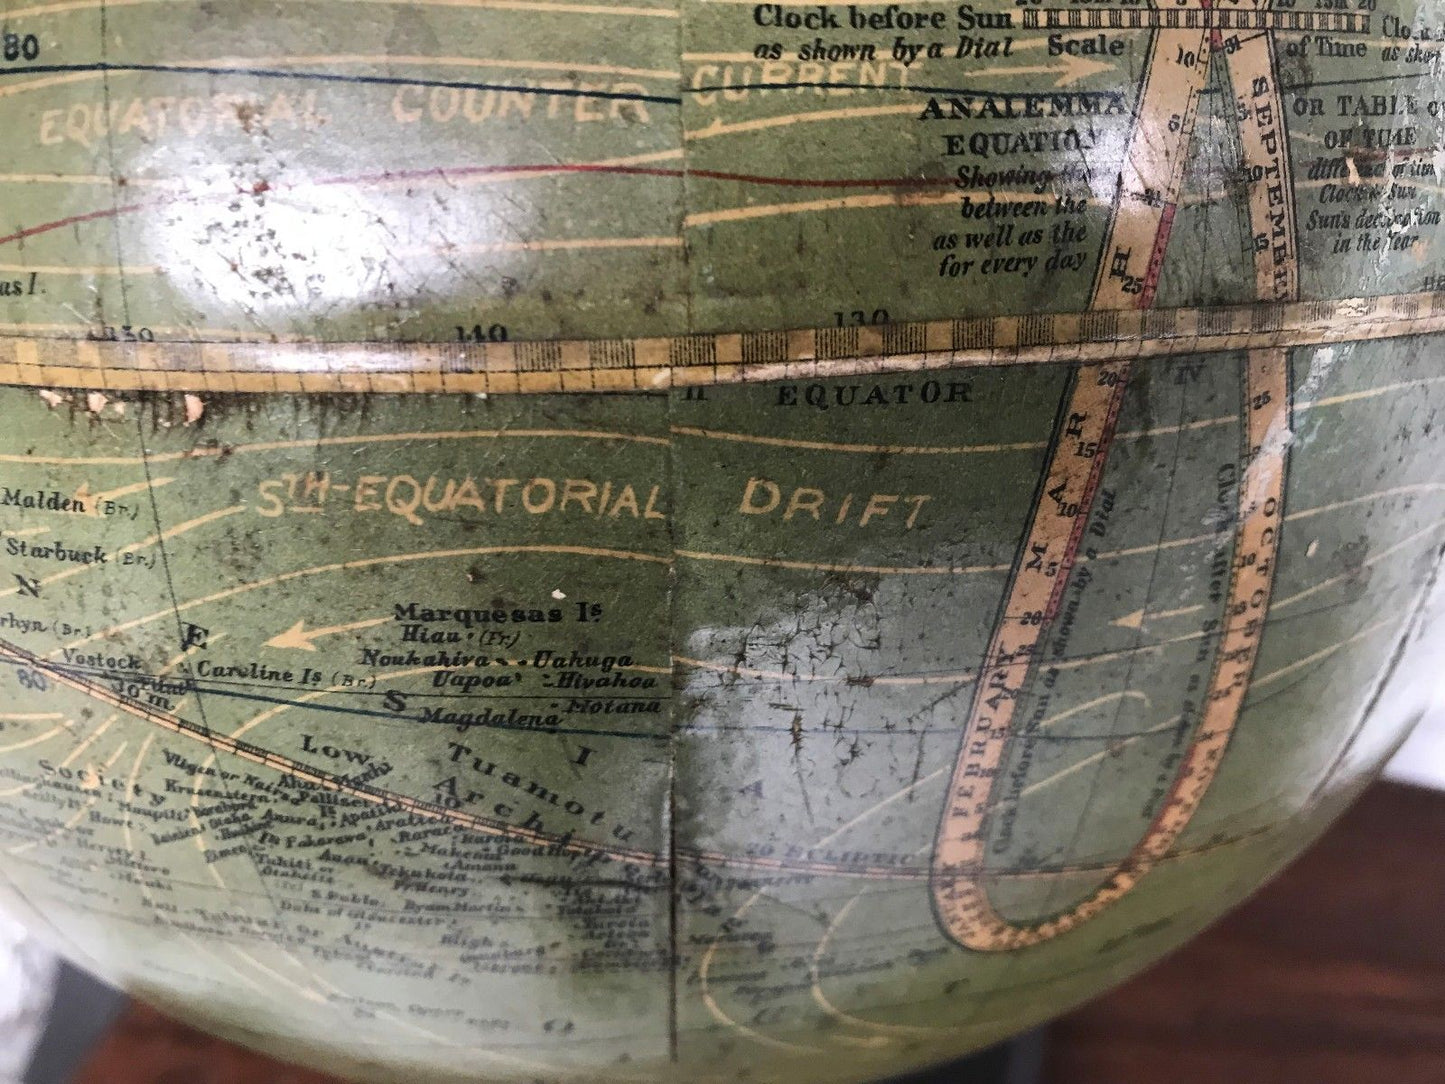 EARLY 20TH C. NEW PEERLESS 12 INCH GLOBE BY ATLAS SCHOOL SUPPLY CO. - CHICAGO